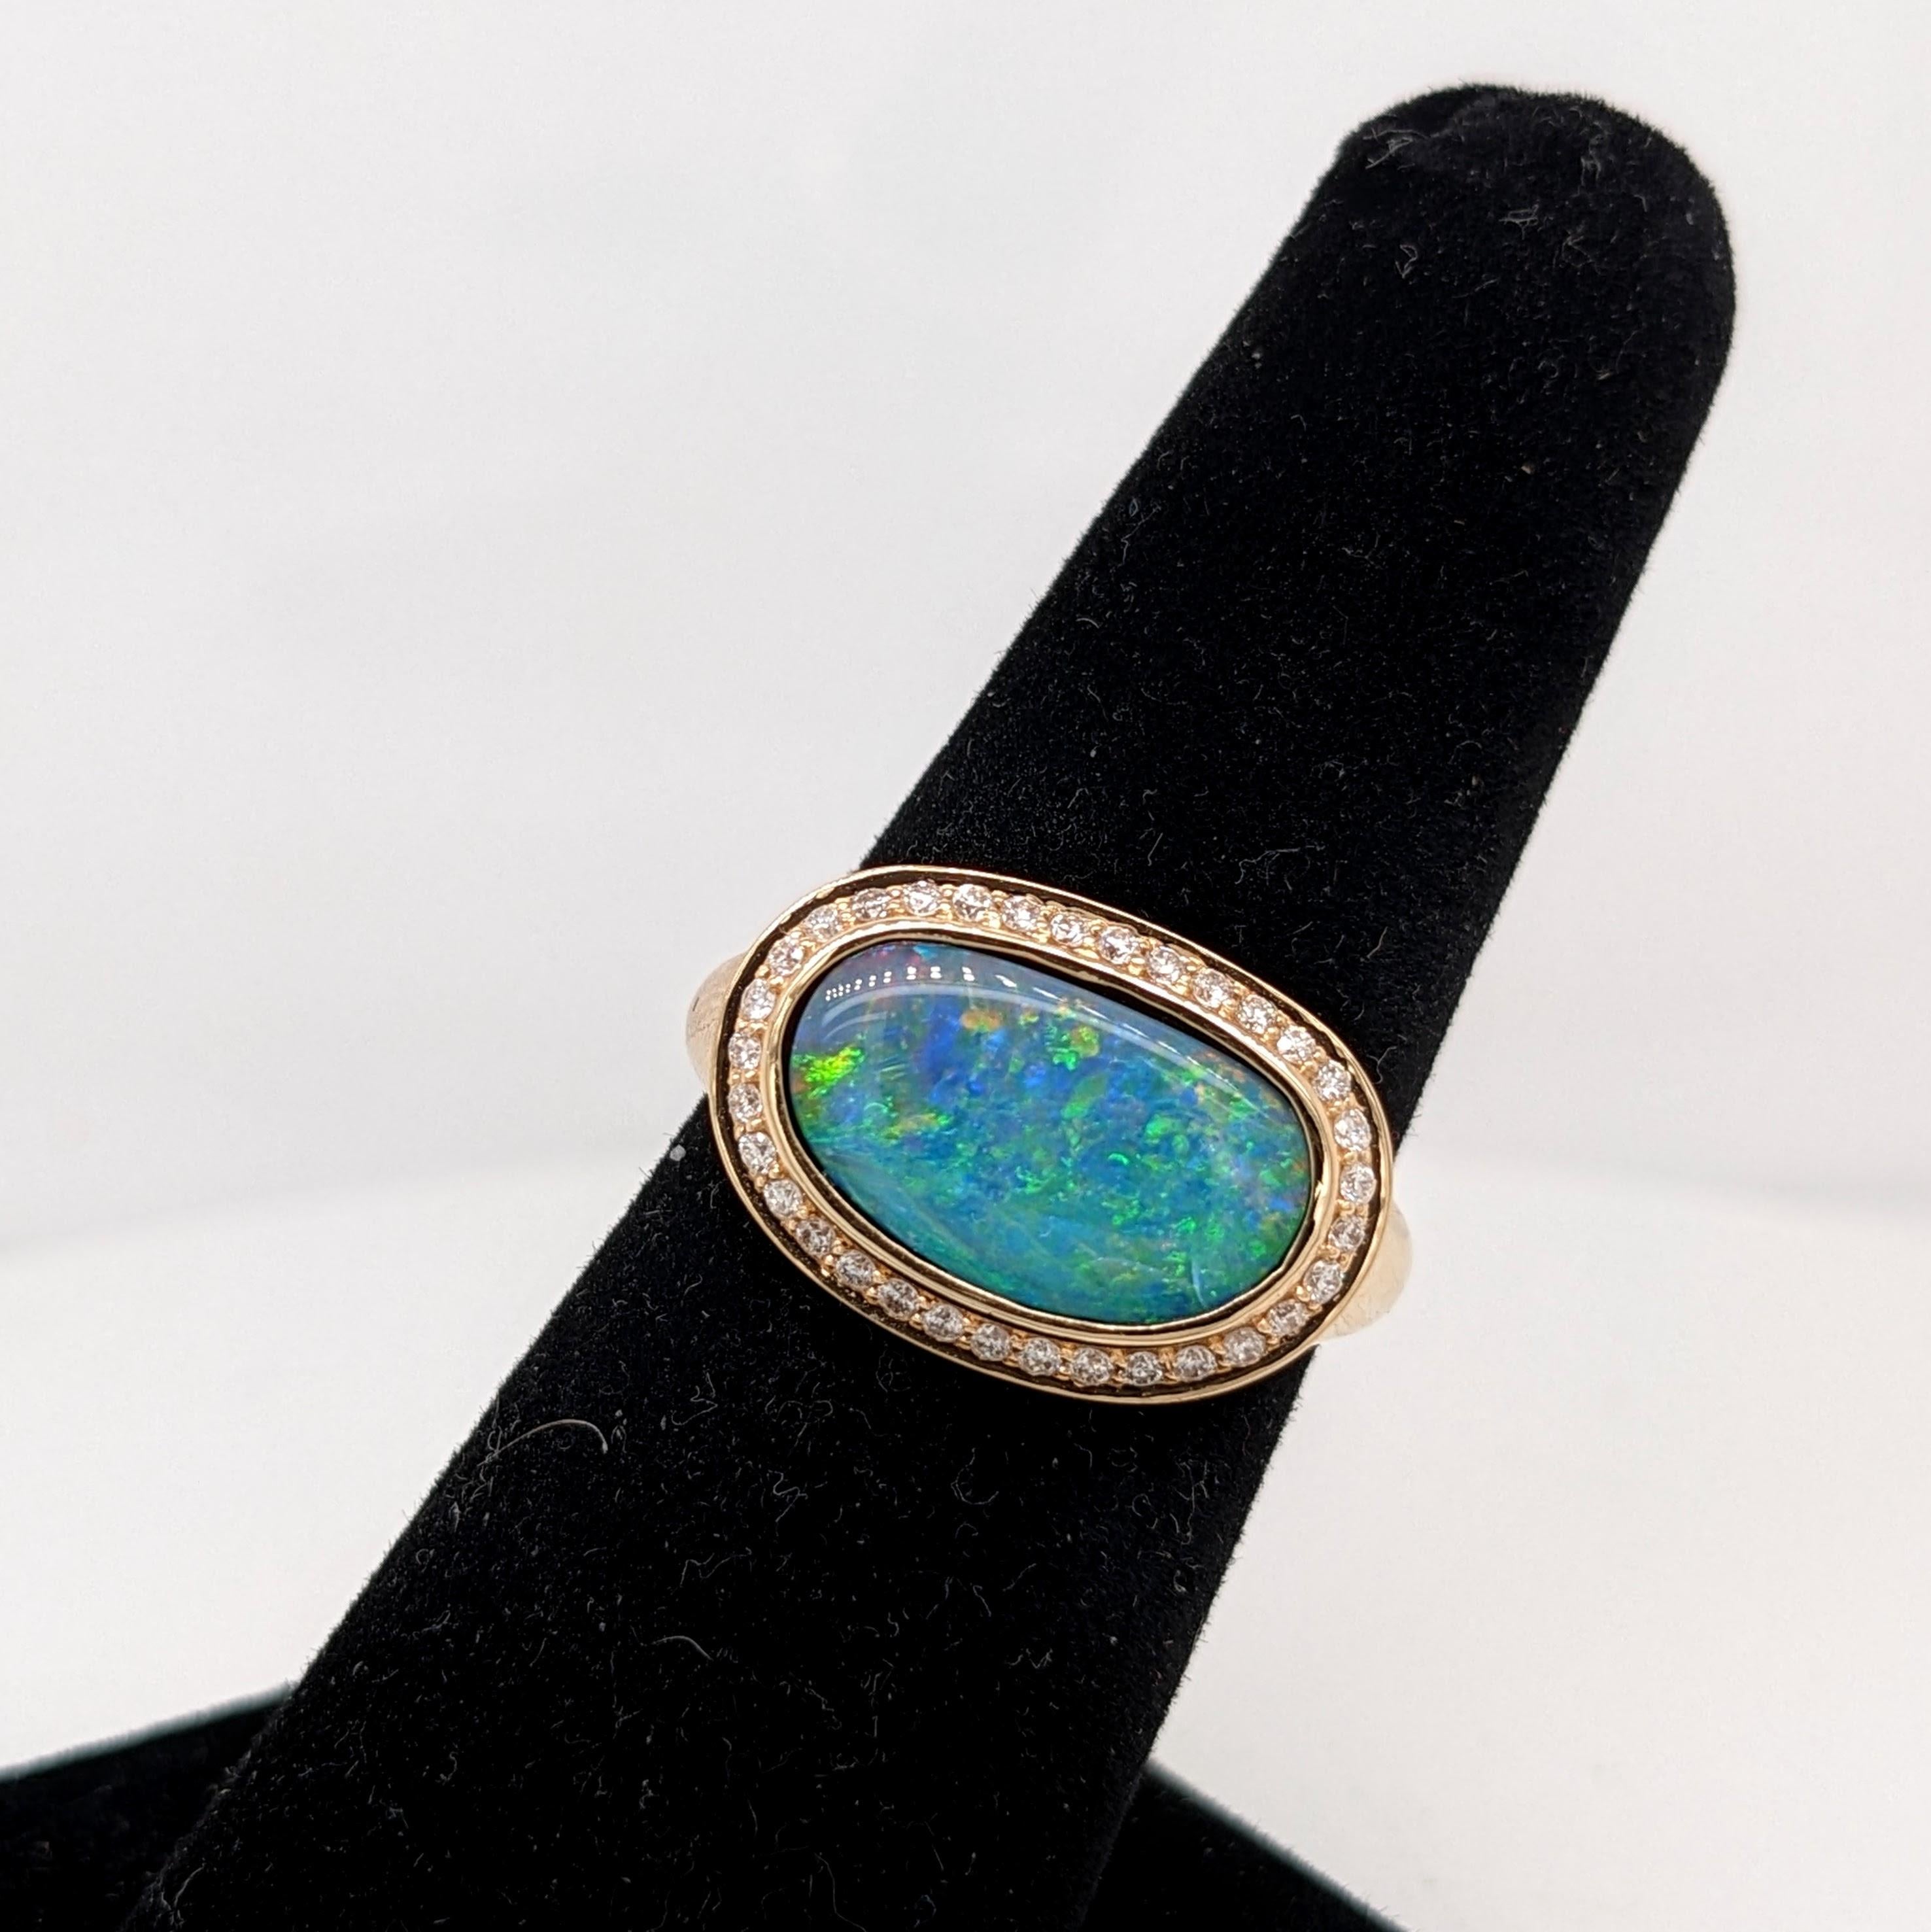 This unique ring features a black Opal with an amazing play of color. Set in solid 14k Gold, this piece is accented with natural diamonds.

The occasions to show off this ring are endless - mother's day, graduation, wedding, birthday, date night,